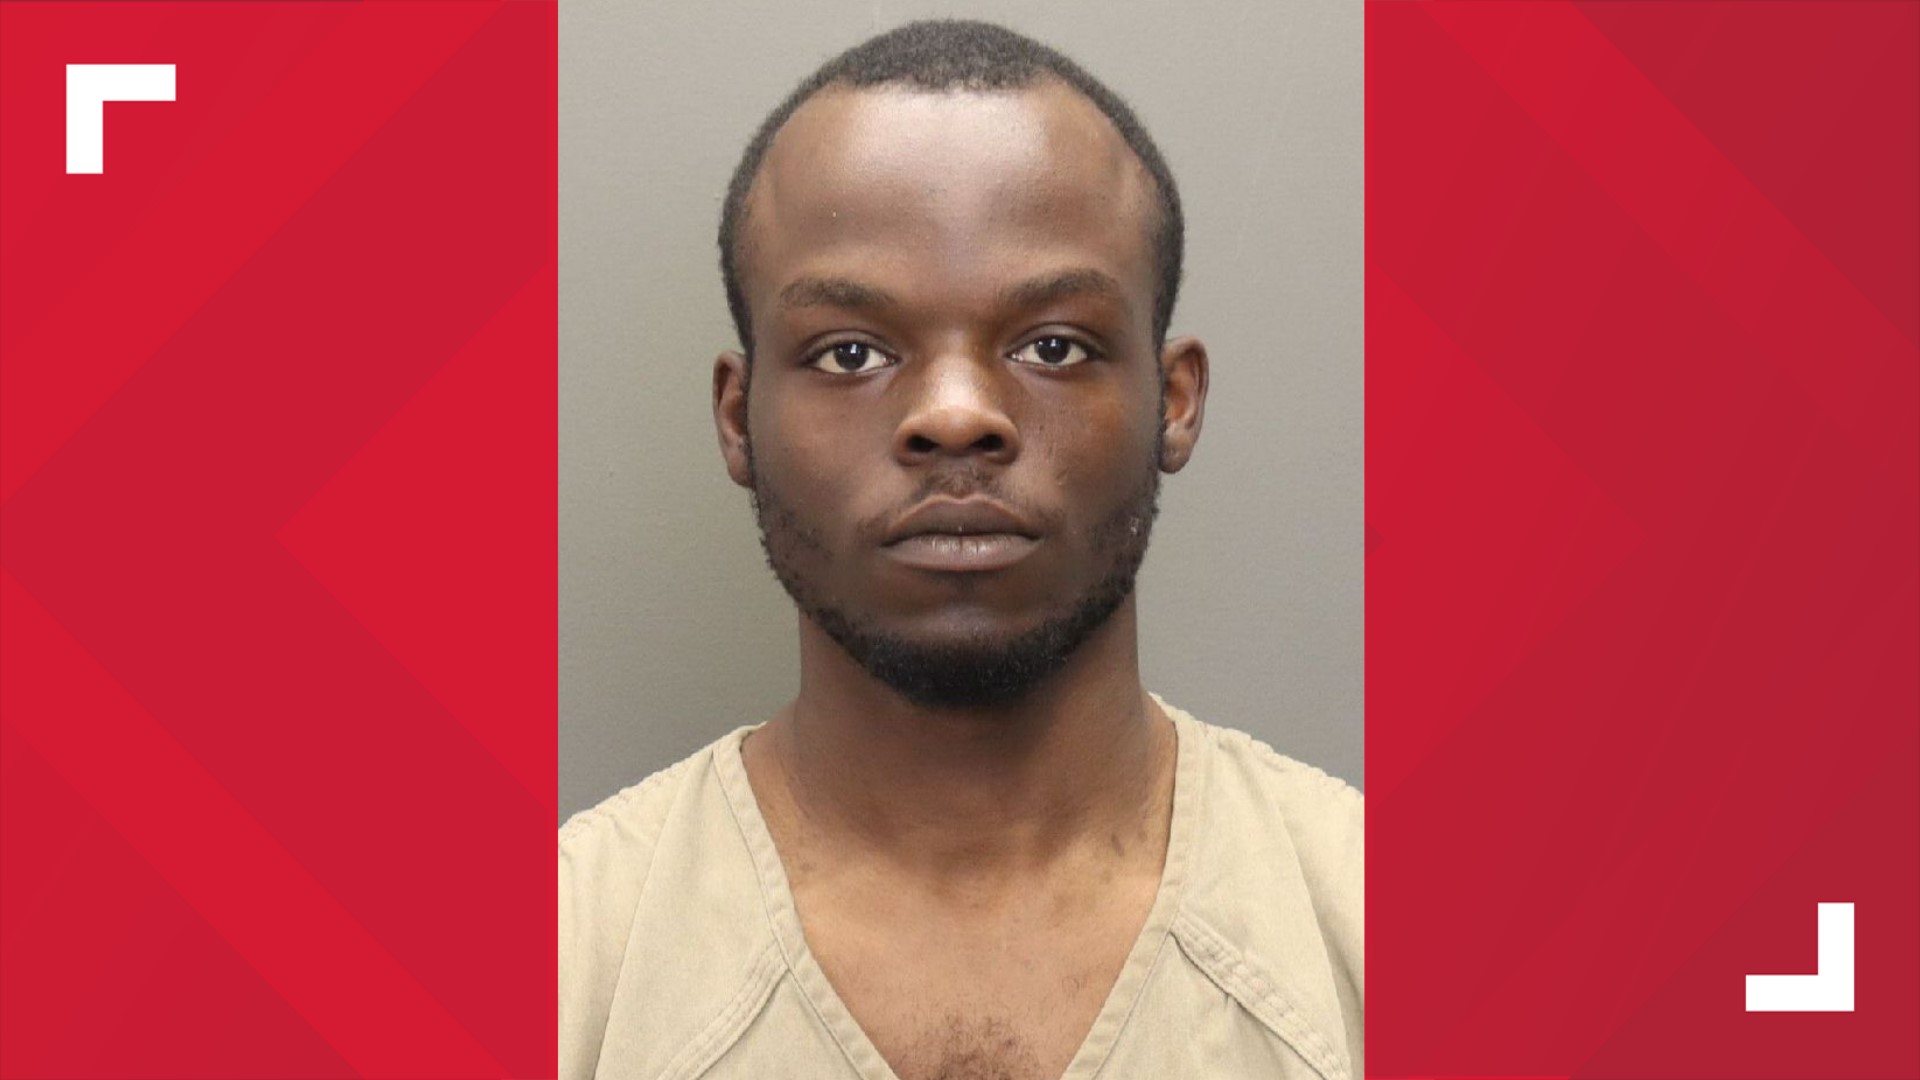 Michael Dickerson is charged with the murder and aggravated robbery of Joshua Jones last June.